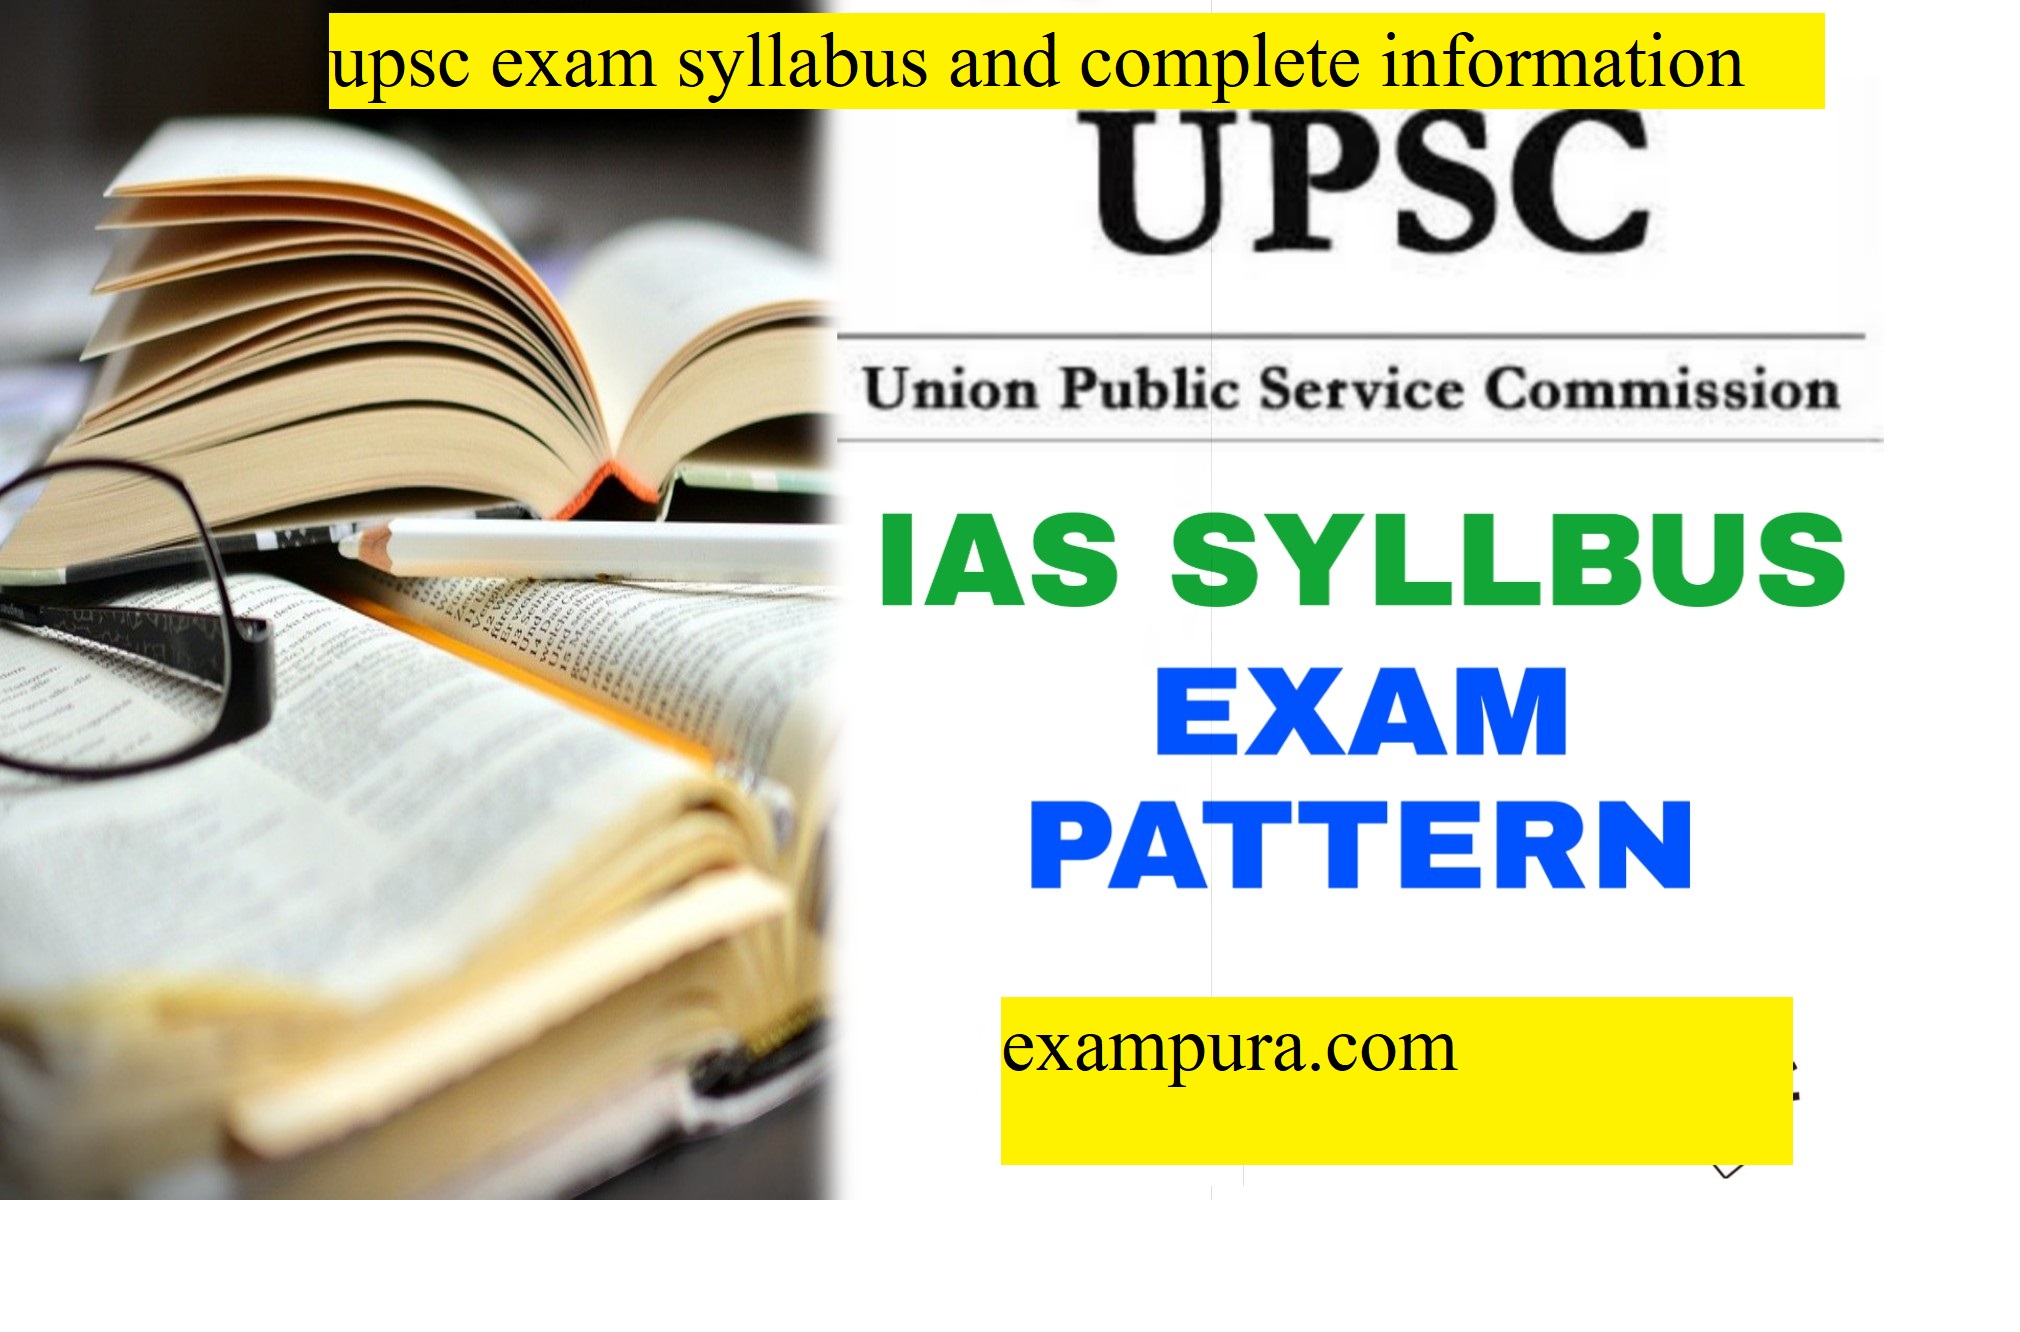 upsc exam syllabus and complete information